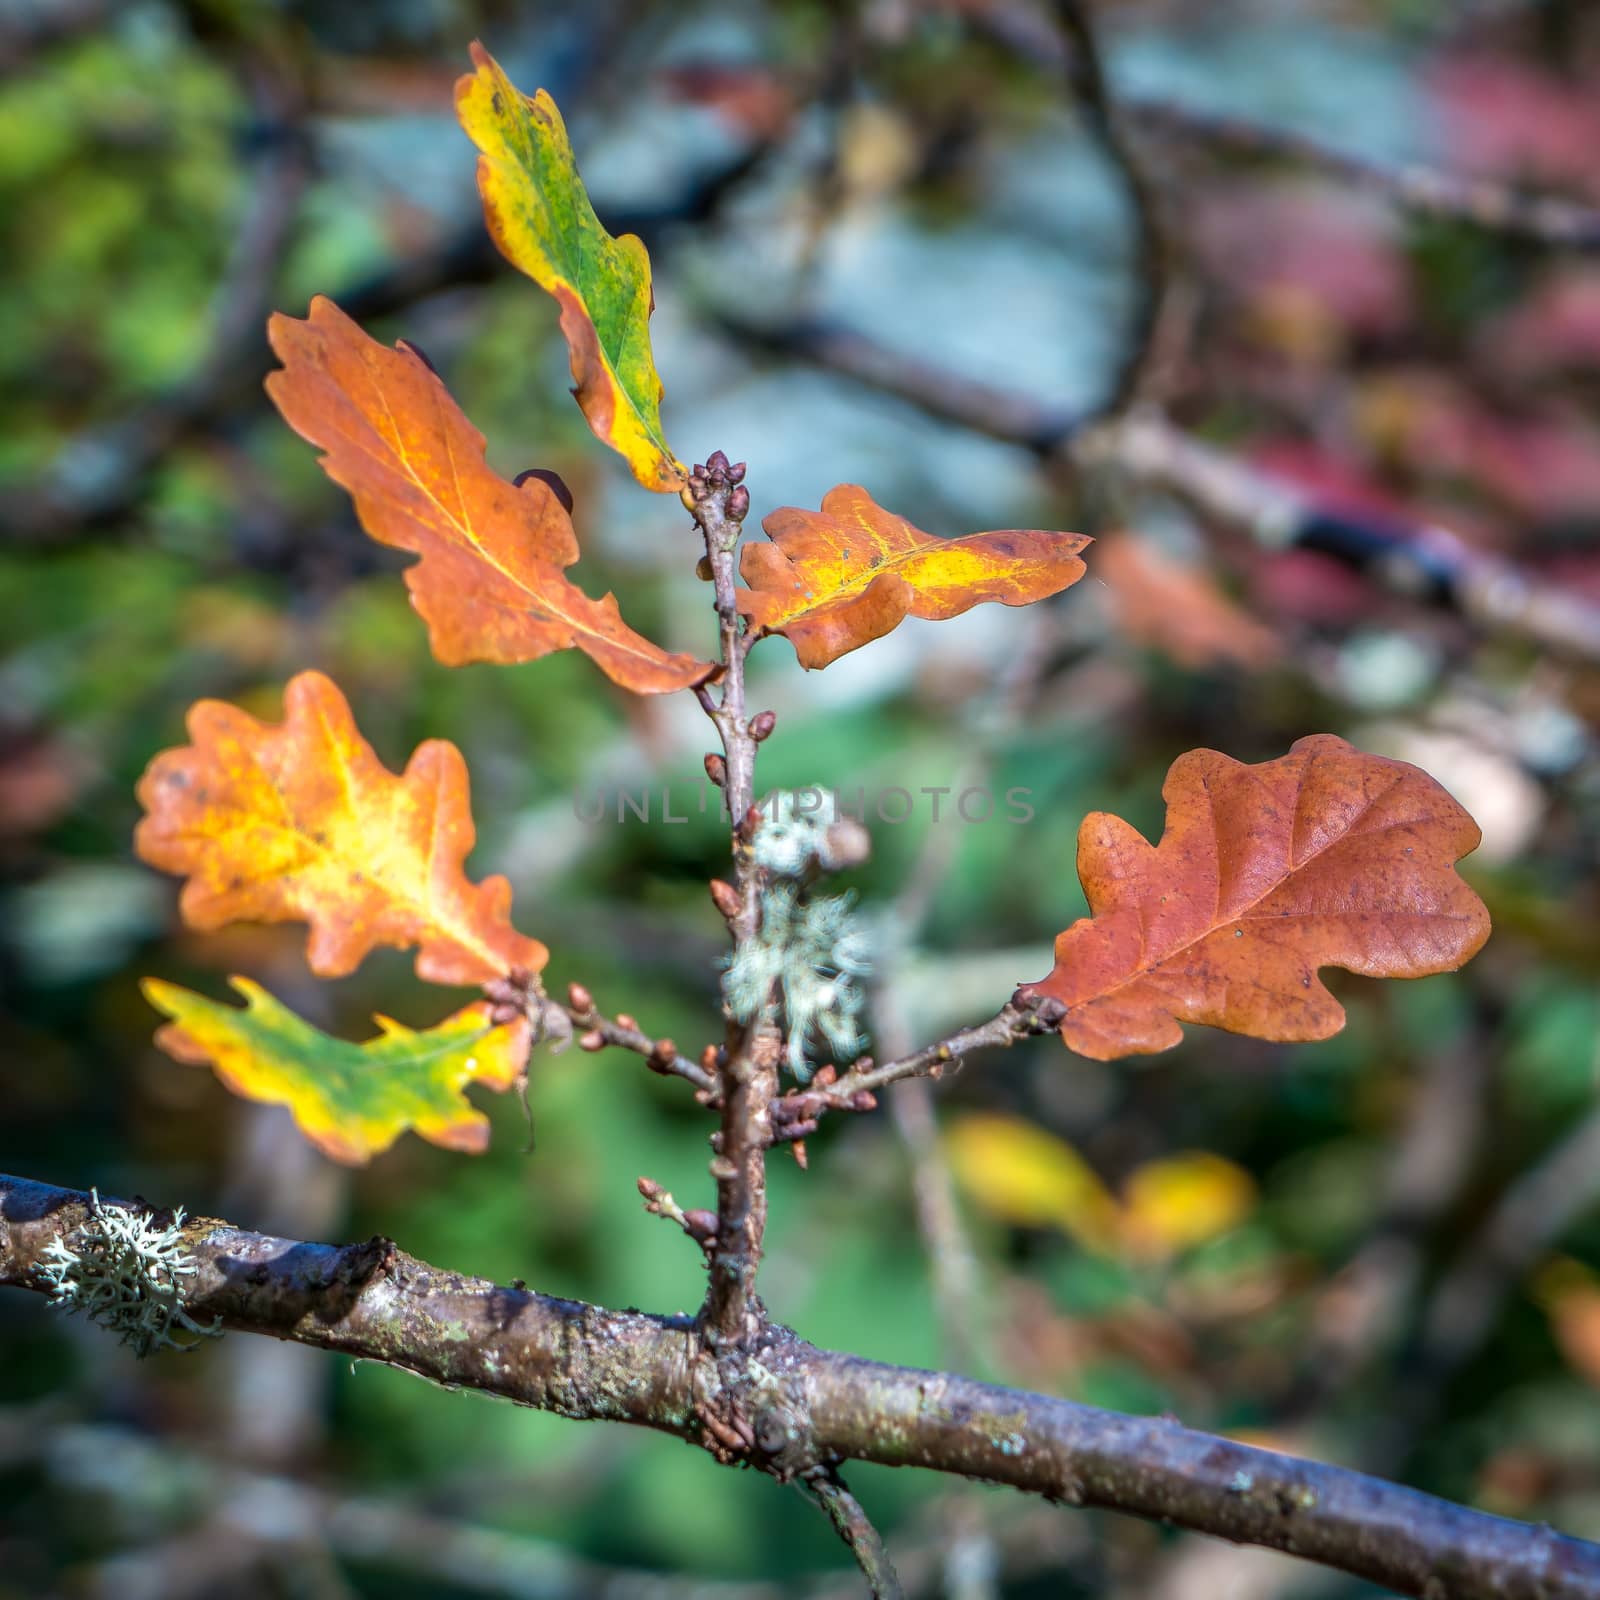 Oak Leaves Decaying on a Tree in Autumn